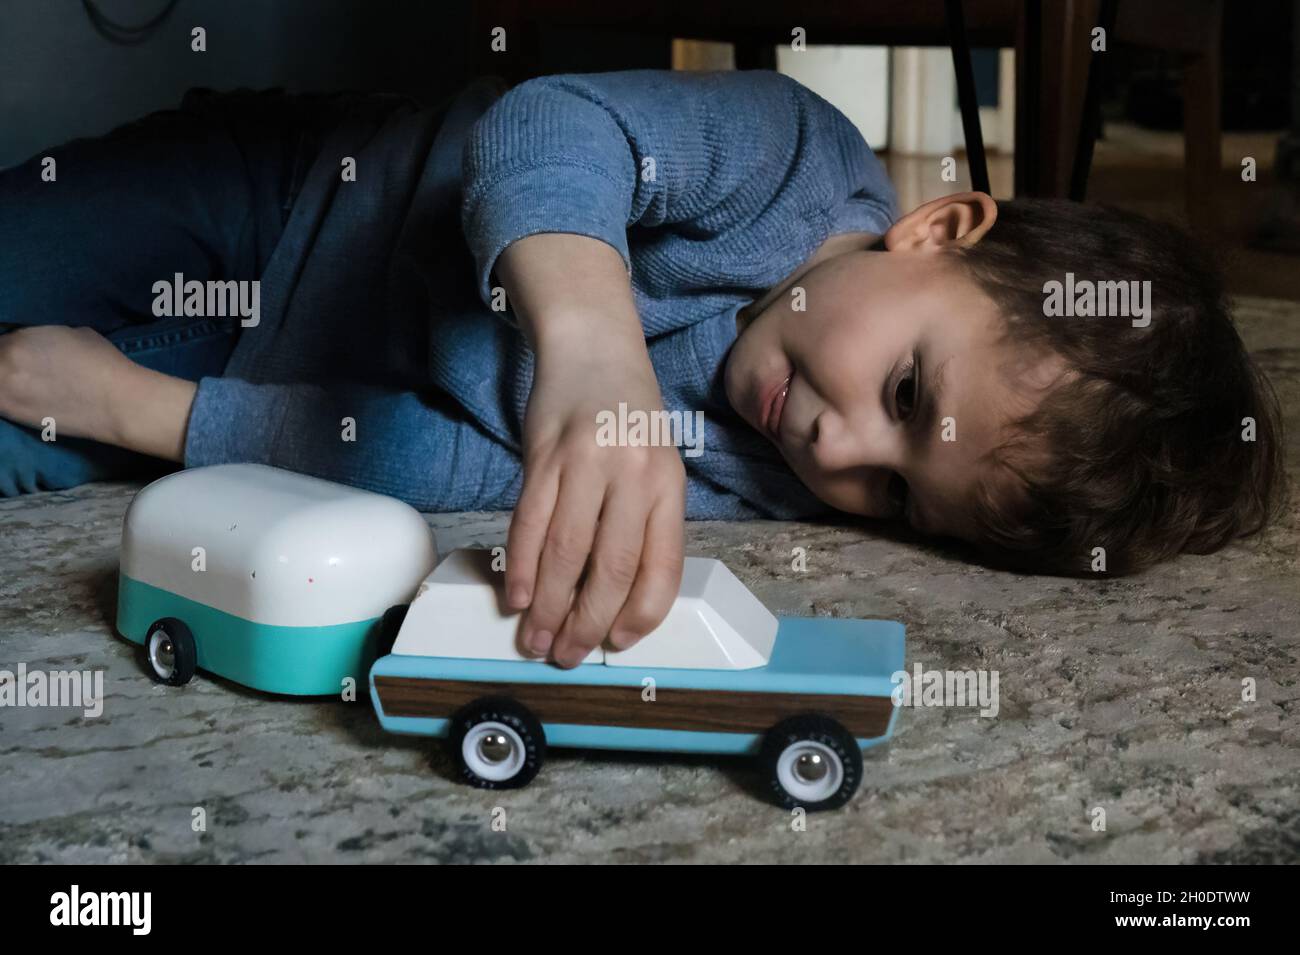 Boy playing with toy car and camper on the living room rug Stock Photo